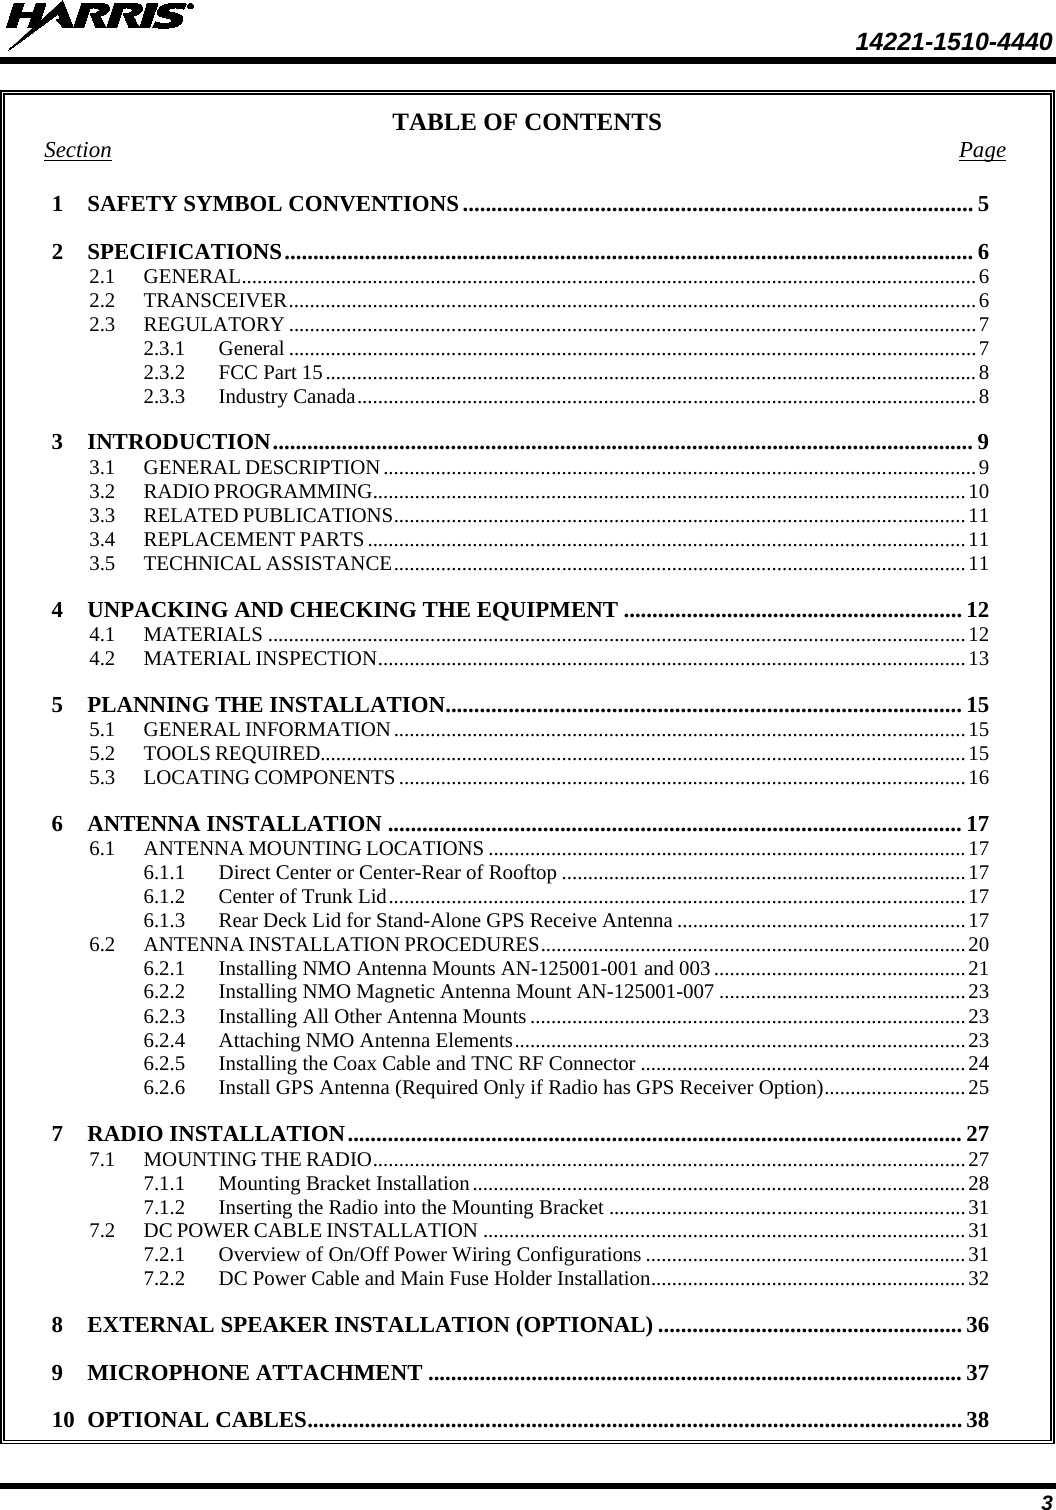  14221-1510-4440 3 TABLE OF CONTENTS Section Page 1 SAFETY SYMBOL CONVENTIONS ......................................................................................... 5 2 SPECIFICATIONS ........................................................................................................................ 6 2.1 GENERAL ............................................................................................................................................ 6 2.2 TRANSCEIVER ................................................................................................................................... 6 2.3 REGULATORY ................................................................................................................................... 7 2.3.1 General ................................................................................................................................... 7 2.3.2 FCC Part 15 ............................................................................................................................ 8 2.3.3 Industry Canada ...................................................................................................................... 8 3 INTRODUCTION .......................................................................................................................... 9 3.1 GENERAL DESCRIPTION ................................................................................................................. 9 3.2 RADIO PROGRAMMING ................................................................................................................. 10 3.3 RELATED PUBLICATIONS ............................................................................................................. 11 3.4 REPLACEMENT PARTS .................................................................................................................. 11 3.5 TECHNICAL ASSISTANCE ............................................................................................................. 11 4 UNPACKING AND CHECKING THE EQUIPMENT ........................................................... 12 4.1 MATERIALS ..................................................................................................................................... 12 4.2 MATERIAL INSPECTION ................................................................................................................ 13 5 PLANNING THE INSTALLATION.......................................................................................... 15 5.1 GENERAL INFORMATION ............................................................................................................. 15 5.2 TOOLS REQUIRED........................................................................................................................... 15 5.3 LOCATING COMPONENTS ............................................................................................................ 16 6 ANTENNA INSTALLATION .................................................................................................... 17 6.1 ANTENNA MOUNTING LOCATIONS ........................................................................................... 17 6.1.1 Direct Center or Center-Rear of Rooftop ............................................................................. 17 6.1.2 Center of Trunk Lid .............................................................................................................. 17 6.1.3 Rear Deck Lid for Stand-Alone GPS Receive Antenna ....................................................... 17 6.2 ANTENNA INSTALLATION PROCEDURES ................................................................................. 20 6.2.1 Installing NMO Antenna Mounts AN-125001-001 and 003 ................................................ 21 6.2.2 Installing NMO Magnetic Antenna Mount AN-125001-007 ............................................... 23 6.2.3 Installing All Other Antenna Mounts ................................................................................... 23 6.2.4 Attaching NMO Antenna Elements ...................................................................................... 23 6.2.5 Installing the Coax Cable and TNC RF Connector .............................................................. 24 6.2.6 Install GPS Antenna (Required Only if Radio has GPS Receiver Option) ........................... 25 7 RADIO INSTALLATION ........................................................................................................... 27 7.1 MOUNTING THE RADIO ................................................................................................................. 27 7.1.1 Mounting Bracket Installation .............................................................................................. 28 7.1.2 Inserting the Radio into the Mounting Bracket .................................................................... 31 7.2 DC POWER CABLE INSTALLATION ............................................................................................ 31 7.2.1 Overview of On/Off Power Wiring Configurations ............................................................. 31 7.2.2 DC Power Cable and Main Fuse Holder Installation ............................................................ 32 8 EXTERNAL SPEAKER INSTALLATION (OPTIONAL) ..................................................... 36 9 MICROPHONE ATTACHMENT ............................................................................................. 37 10 OPTIONAL CABLES .................................................................................................................. 38 